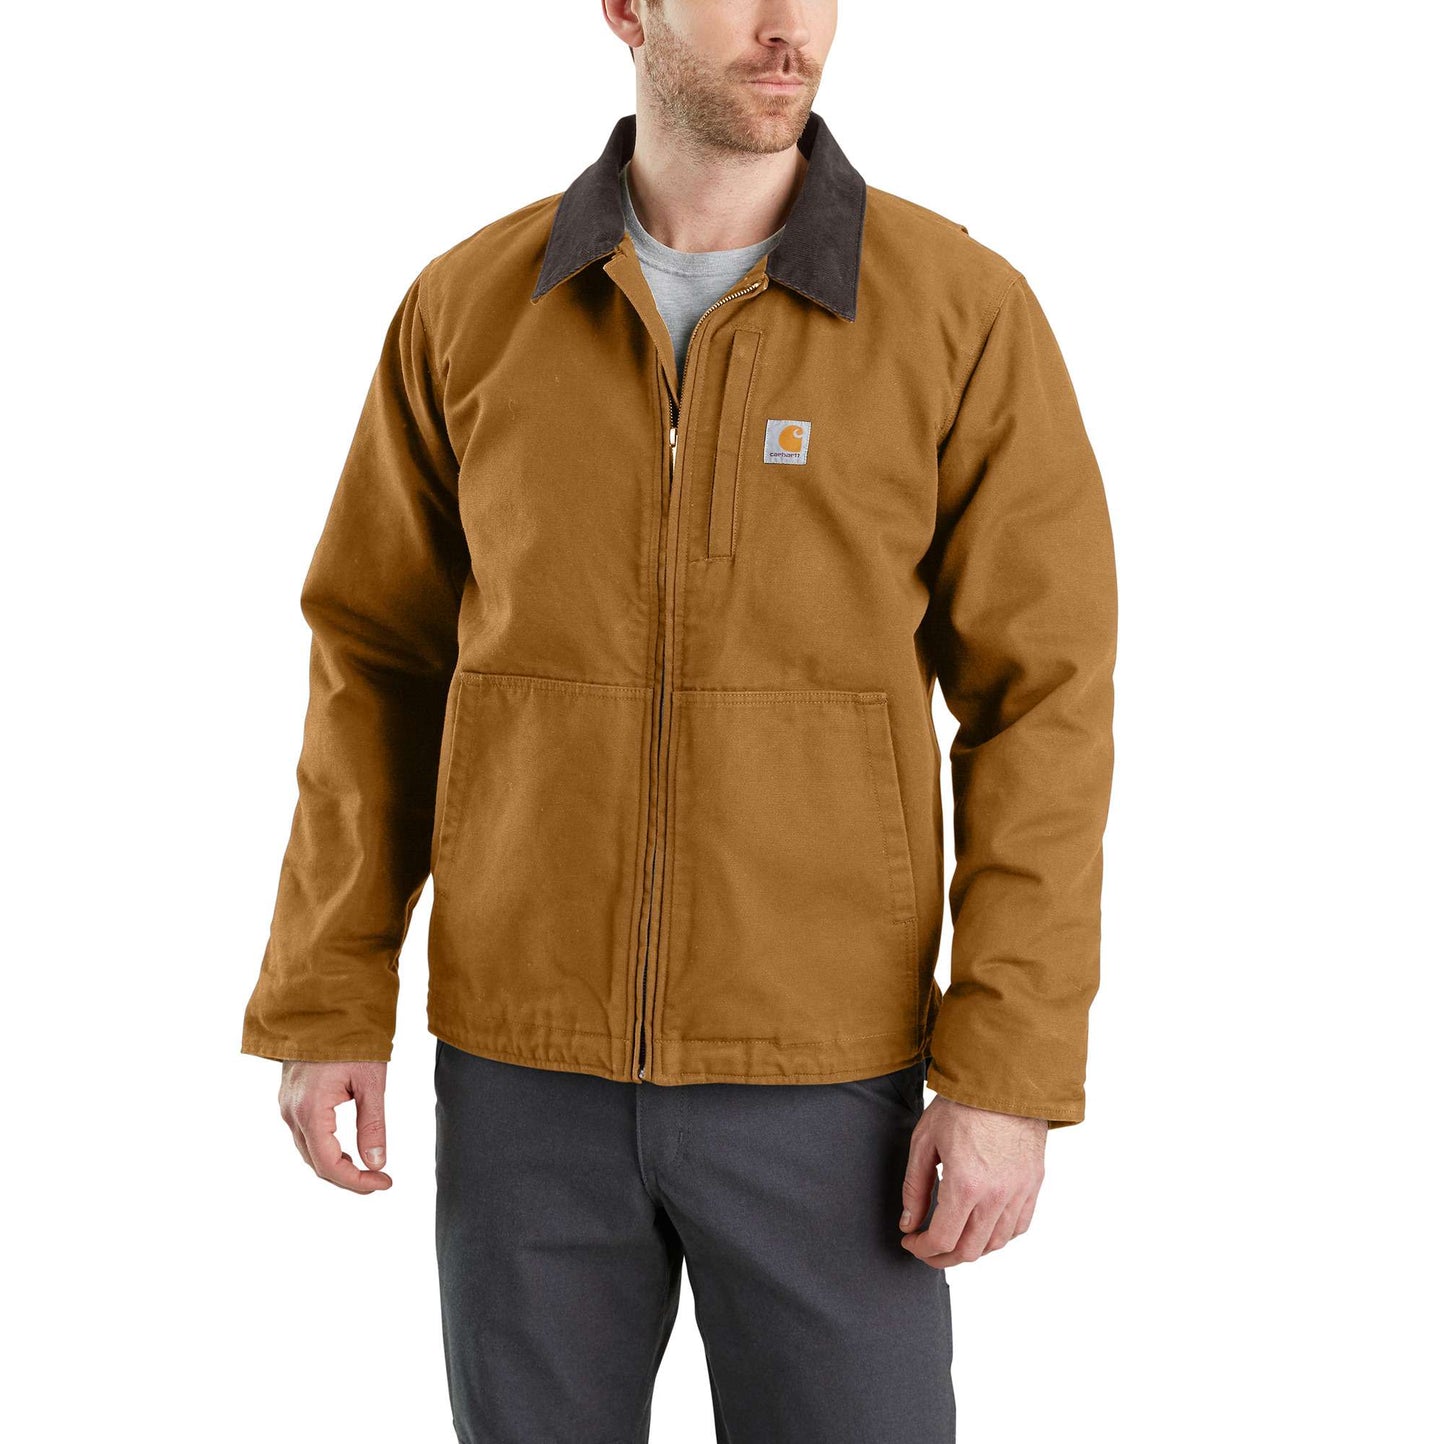 Full Swing® Armstrong Jacket